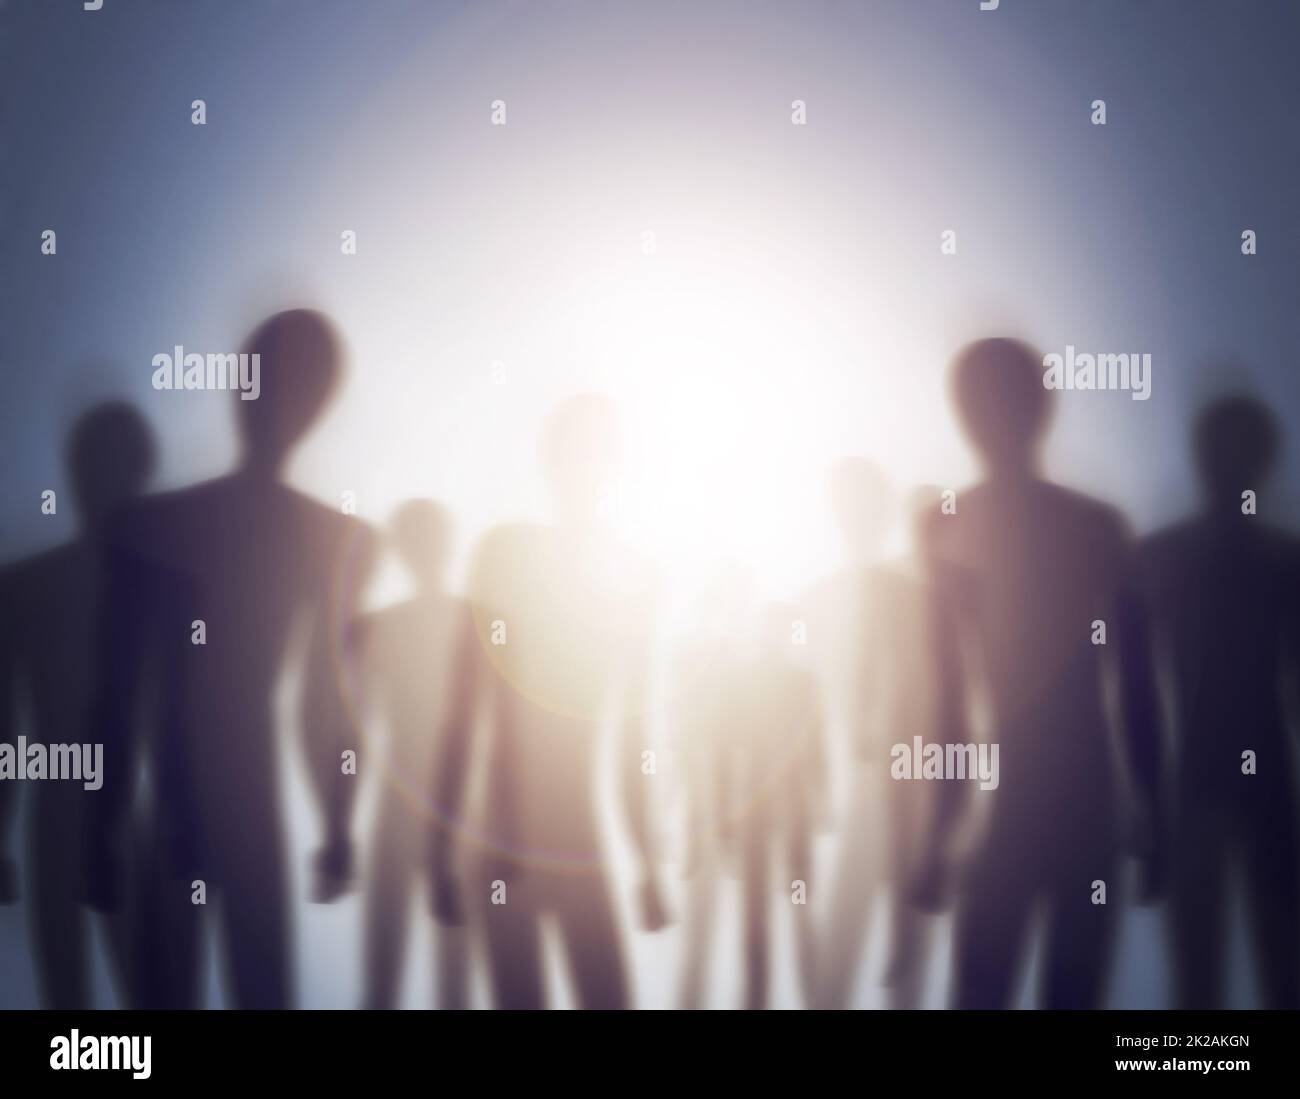 The mothership has arrived. Conceptual image of a group of aliens. Stock Photo